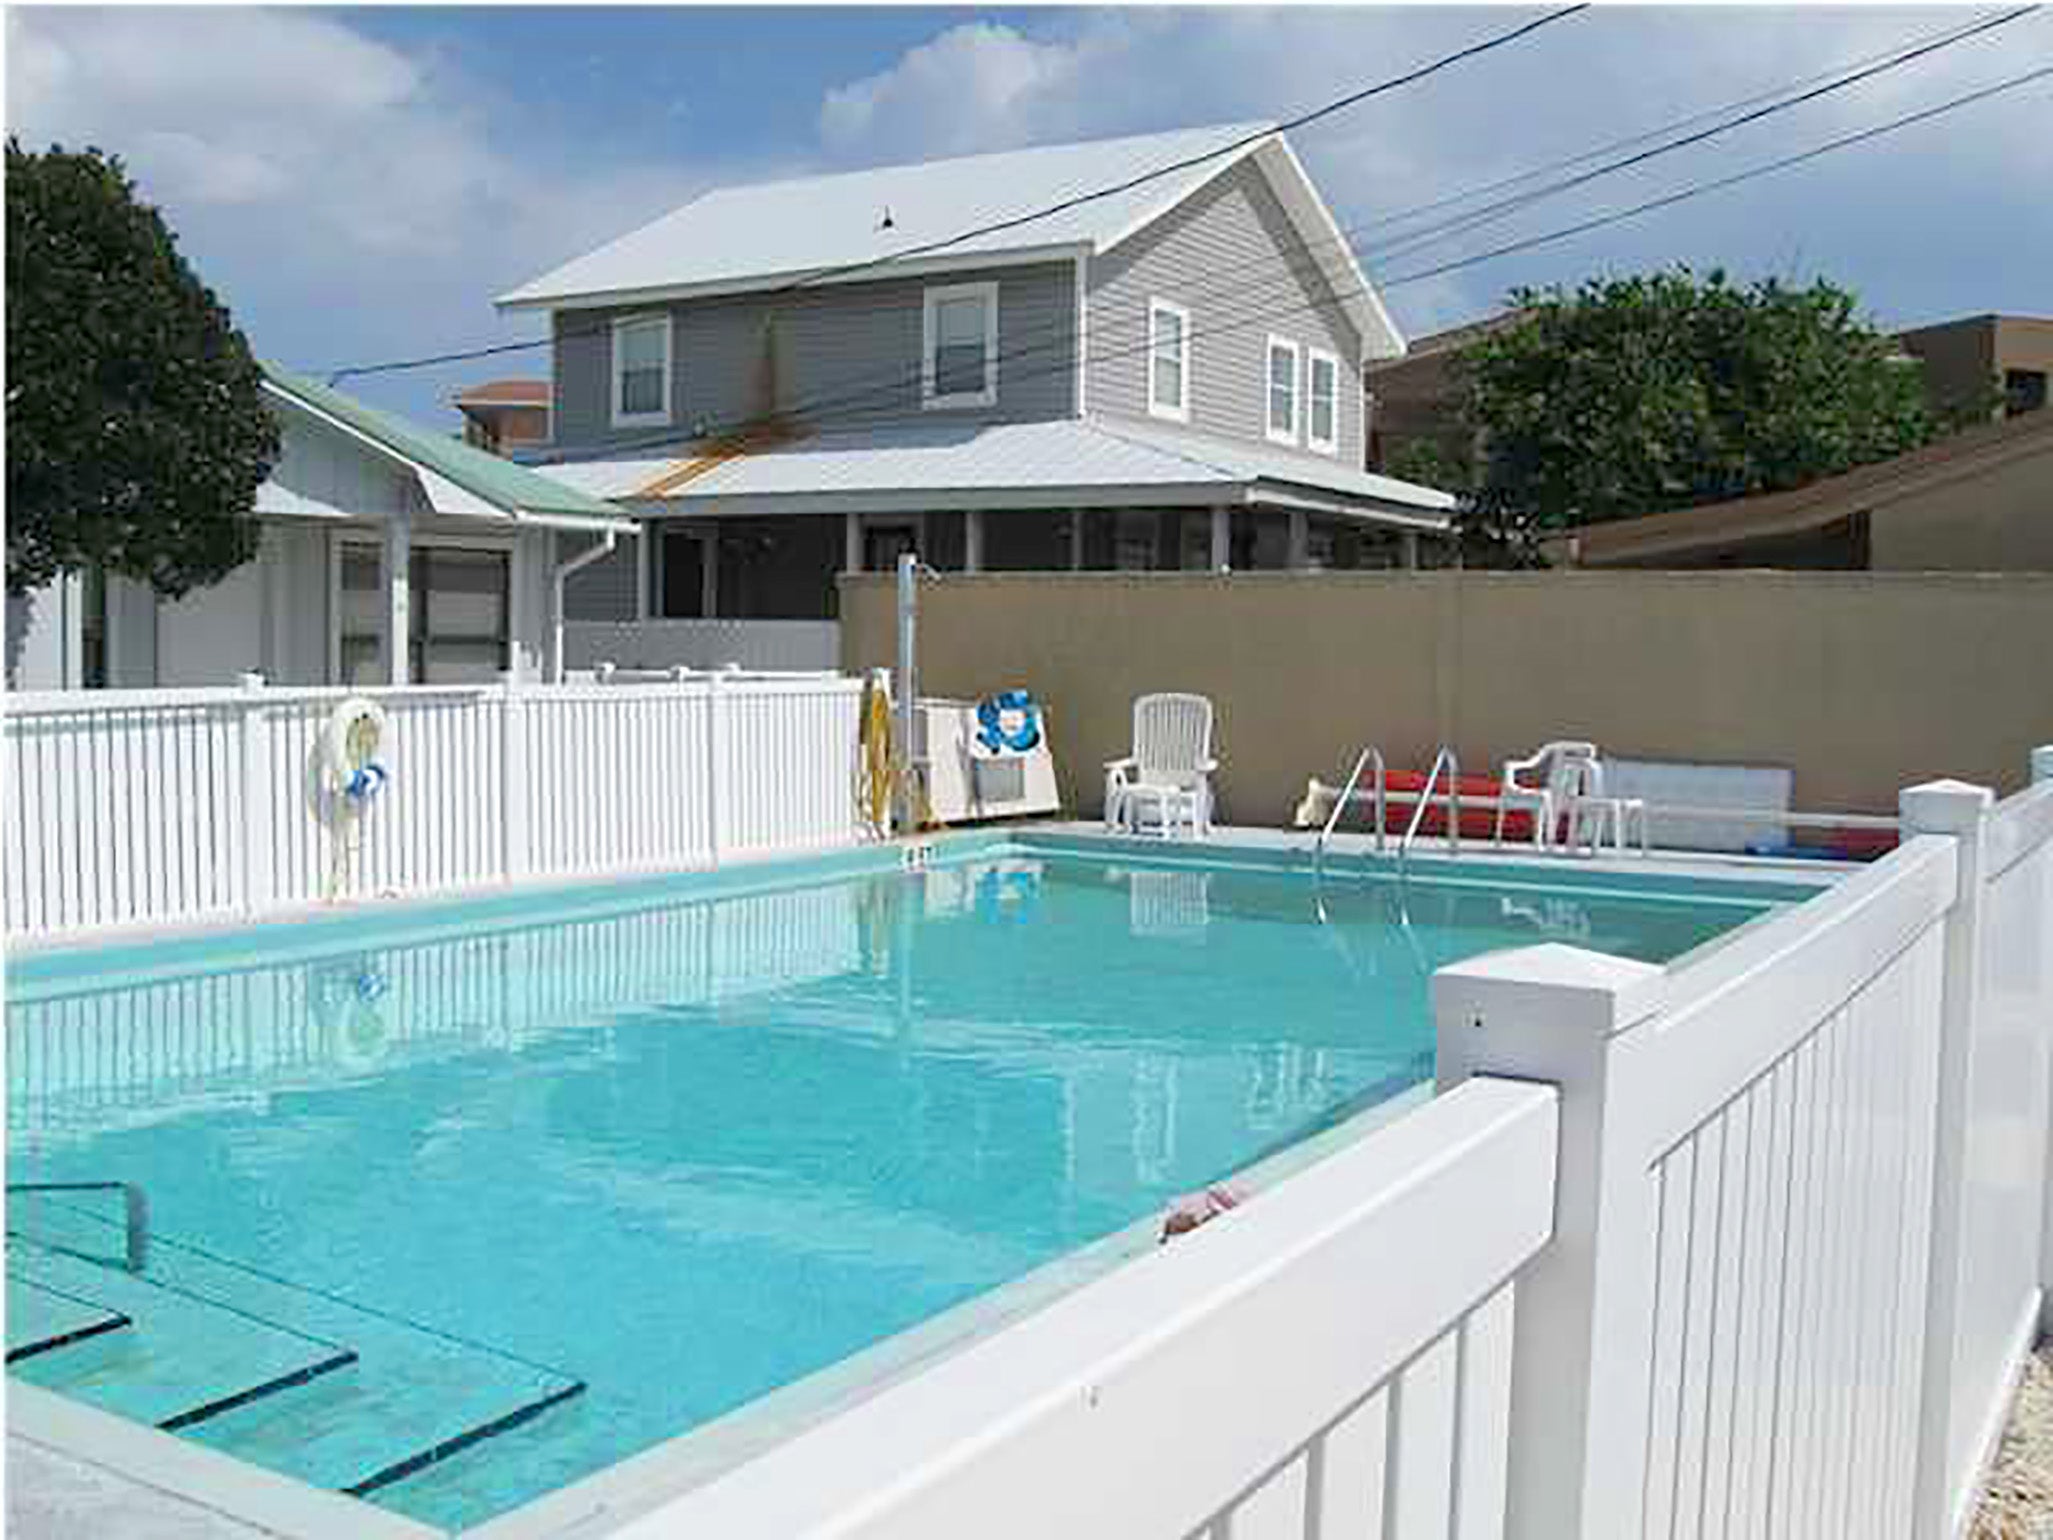 Great+fenced+in+pool